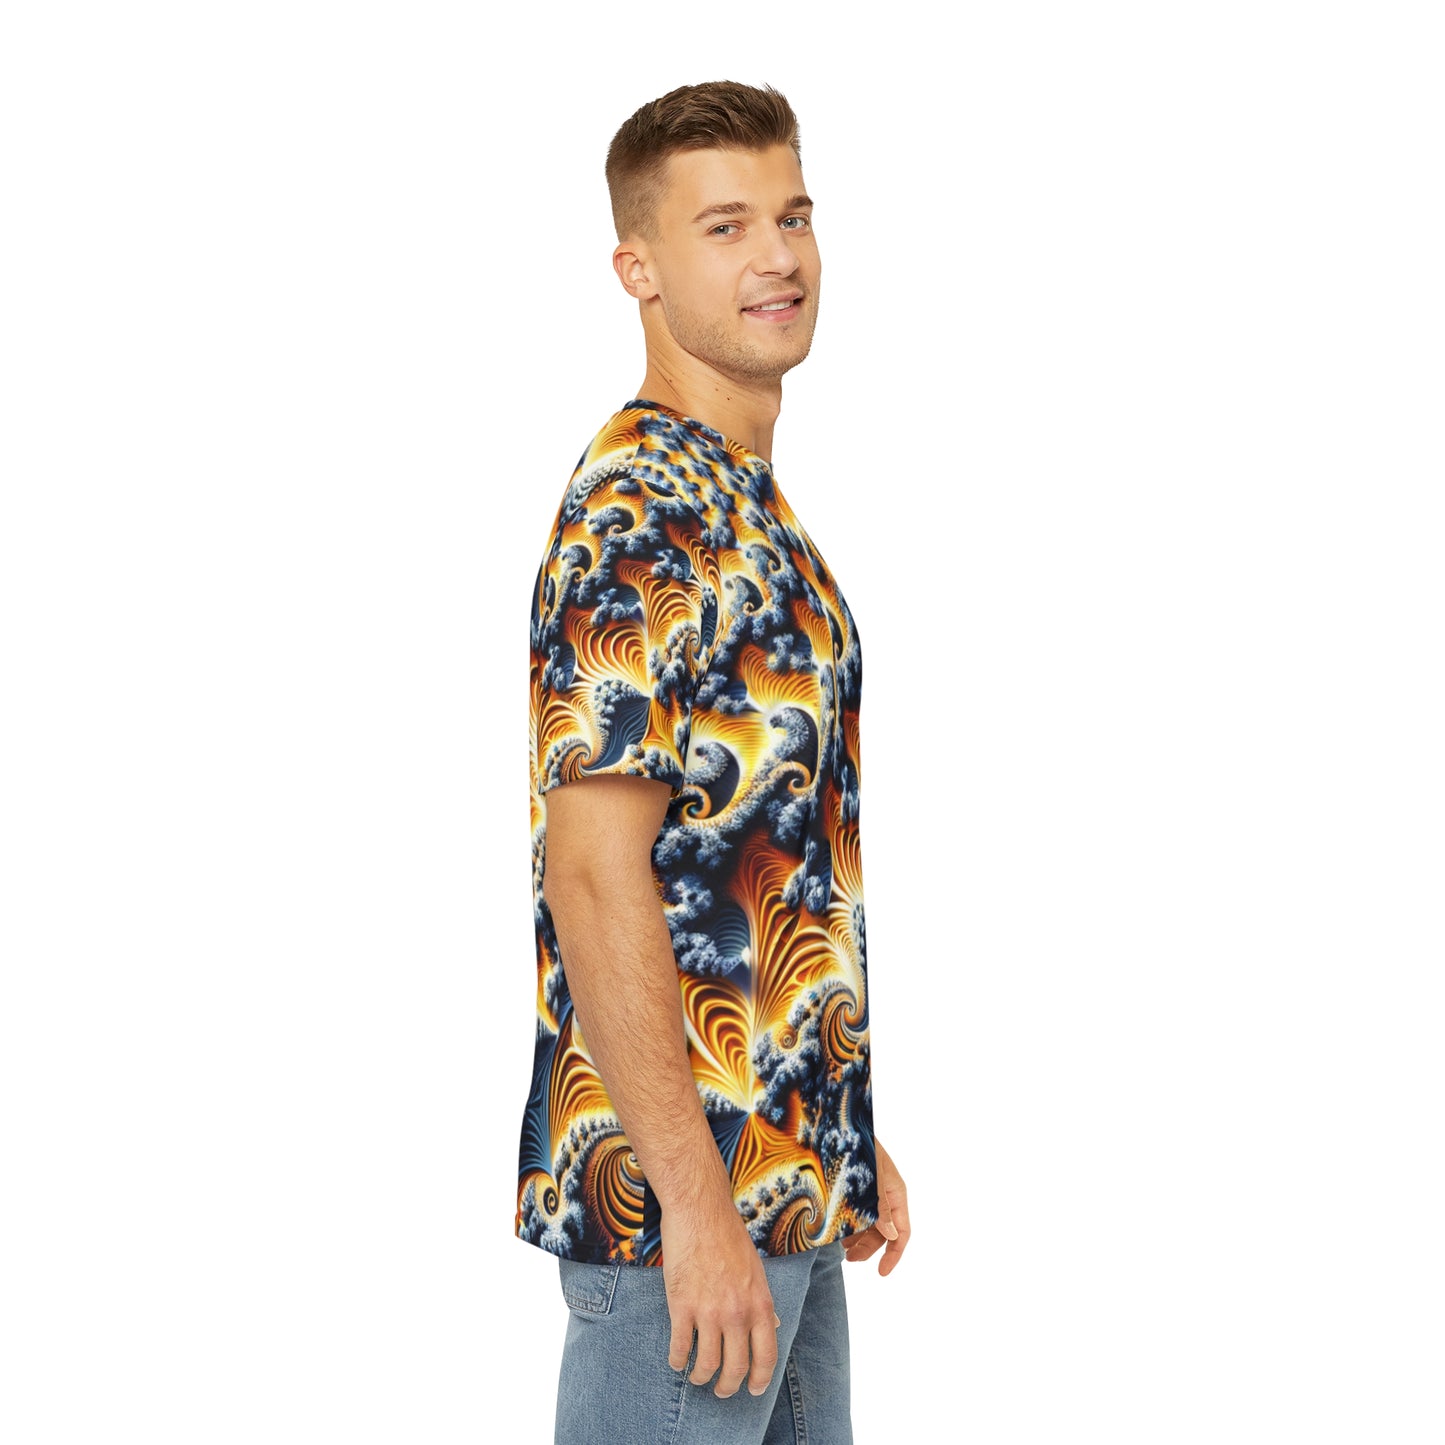 Side view of the Celestial Spirals & Waves Crewneck Pullover All-Over Print Short-Sleeved Shirt yellow blue black white orange celestial pattern paired with casual denim pants worn by a white man